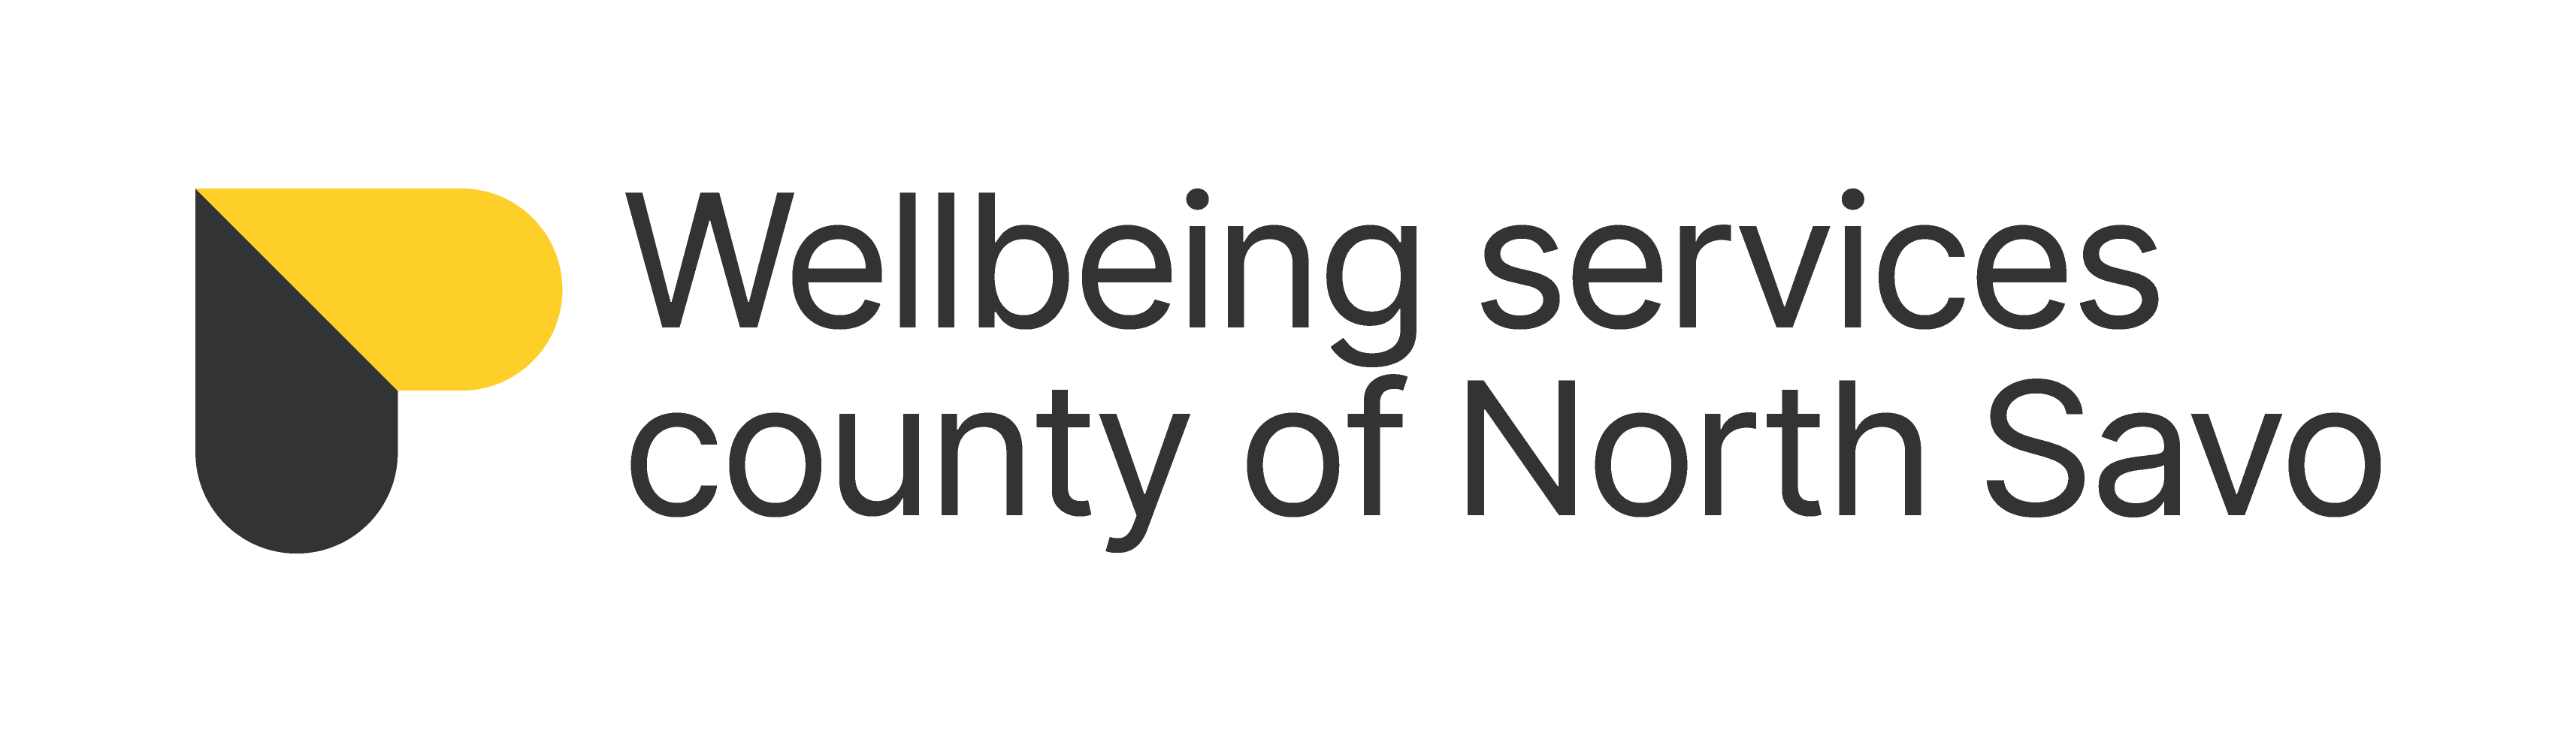 Wellbeing services county of North Savo